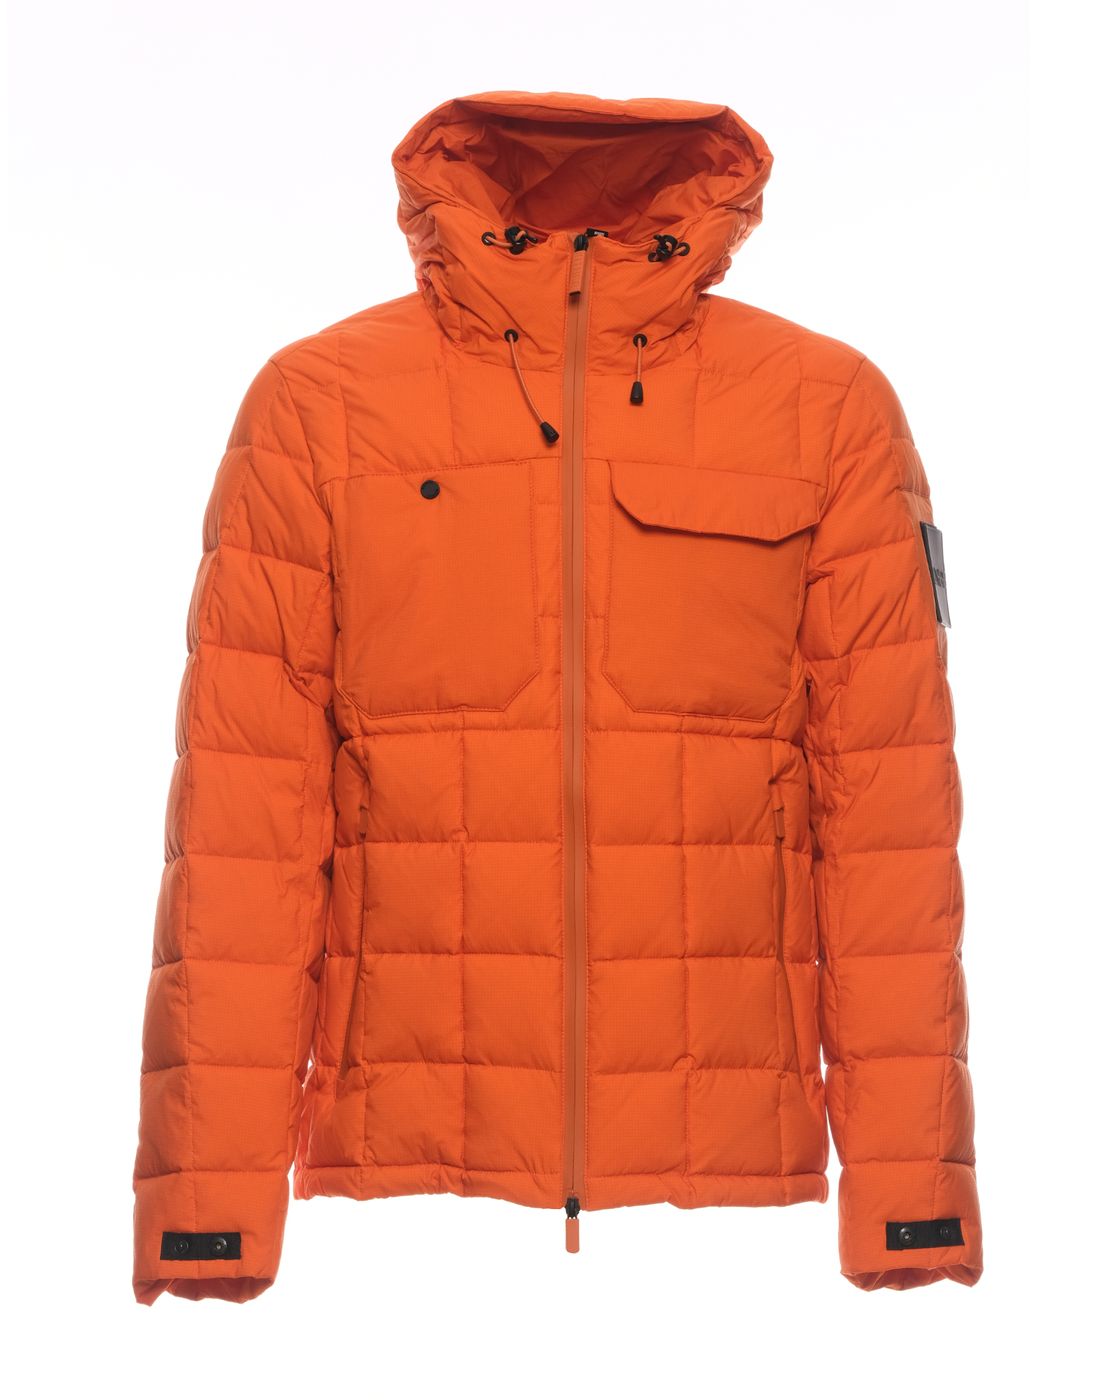 Veste homme iotm590ad34-rd 382 orange out there